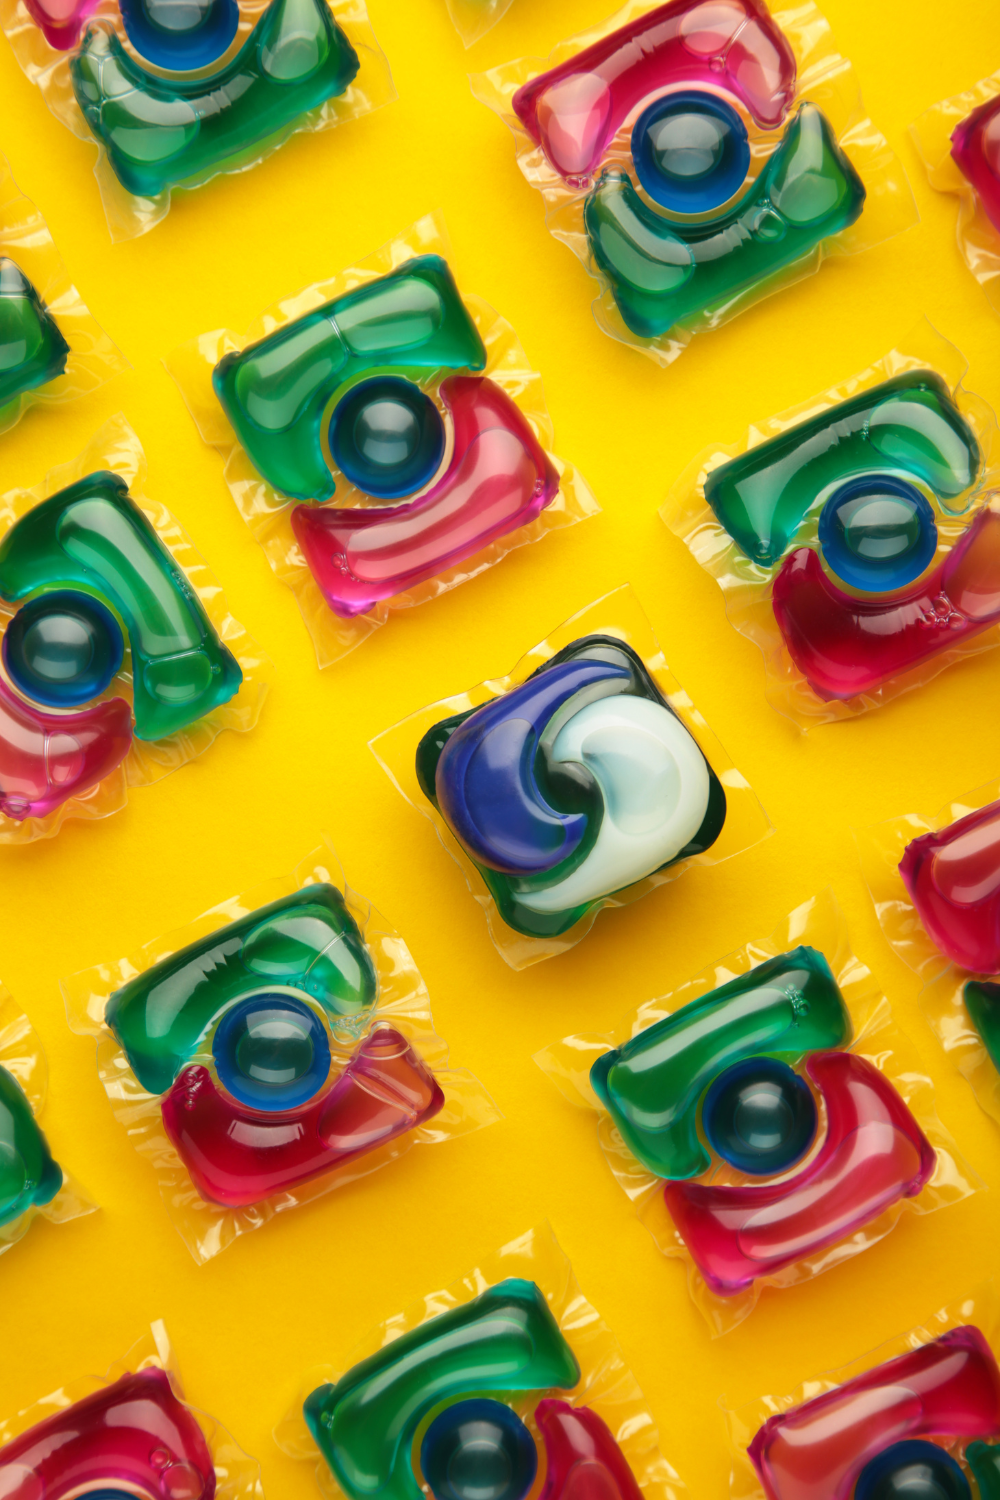 are laundry detergent pods bad for the environment? on TheFiltery.com